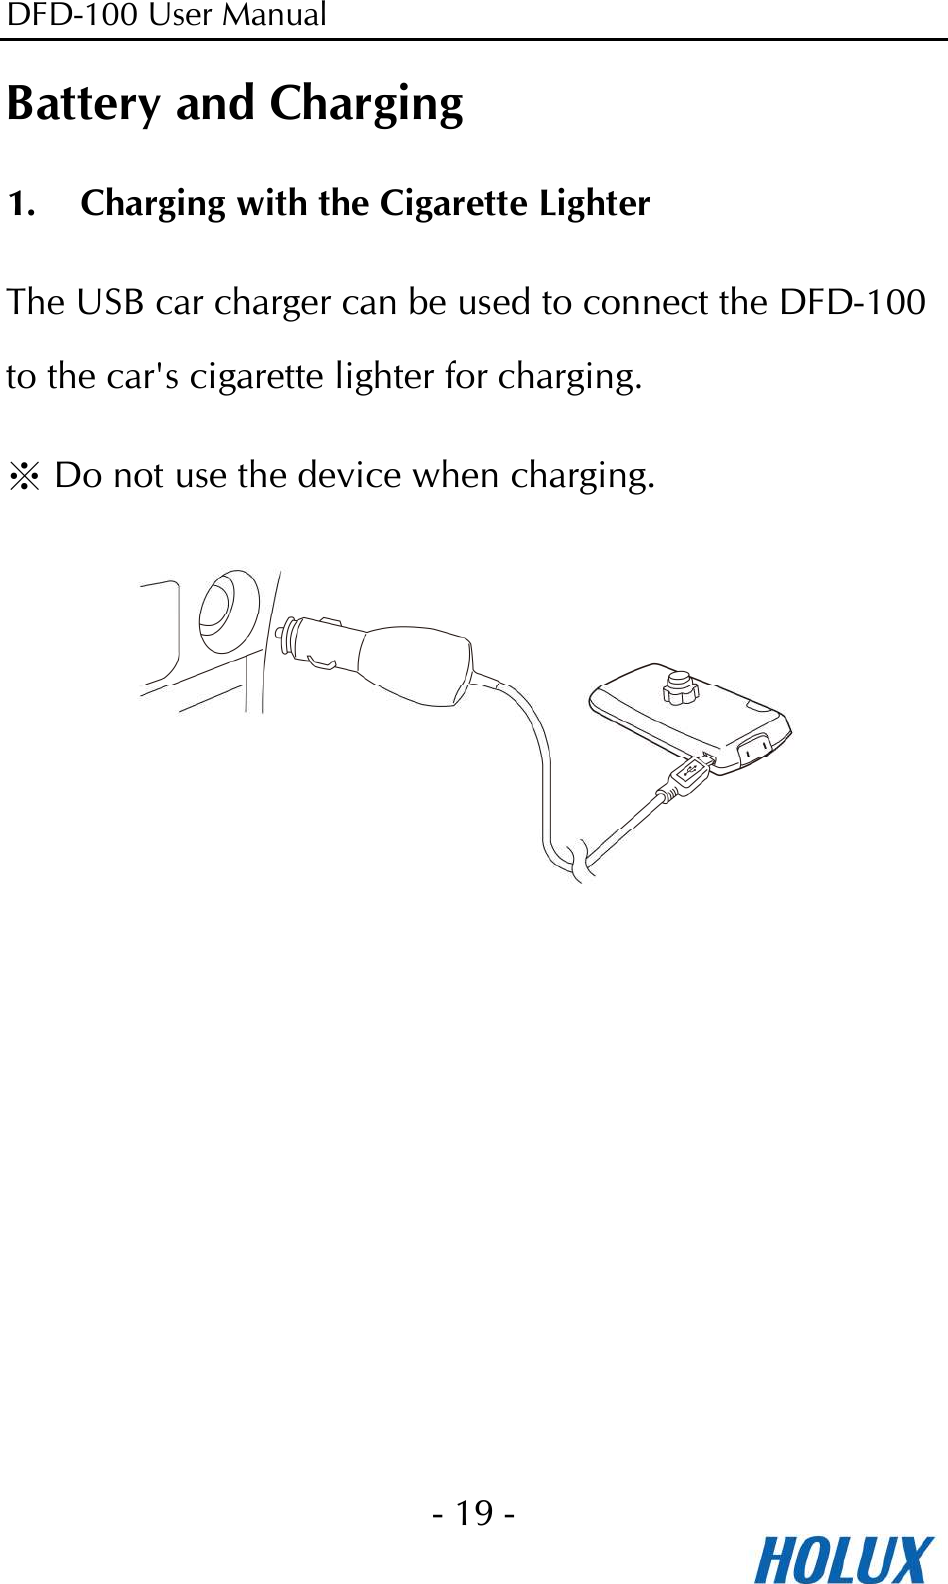 DFD-100 User Manual - 19 -  Battery and Charging 1. Charging with the Cigarette Lighter The USB car charger can be used to connect the DFD-100 to the car&apos;s cigarette lighter for charging.  ※Do not use the device when charging.  